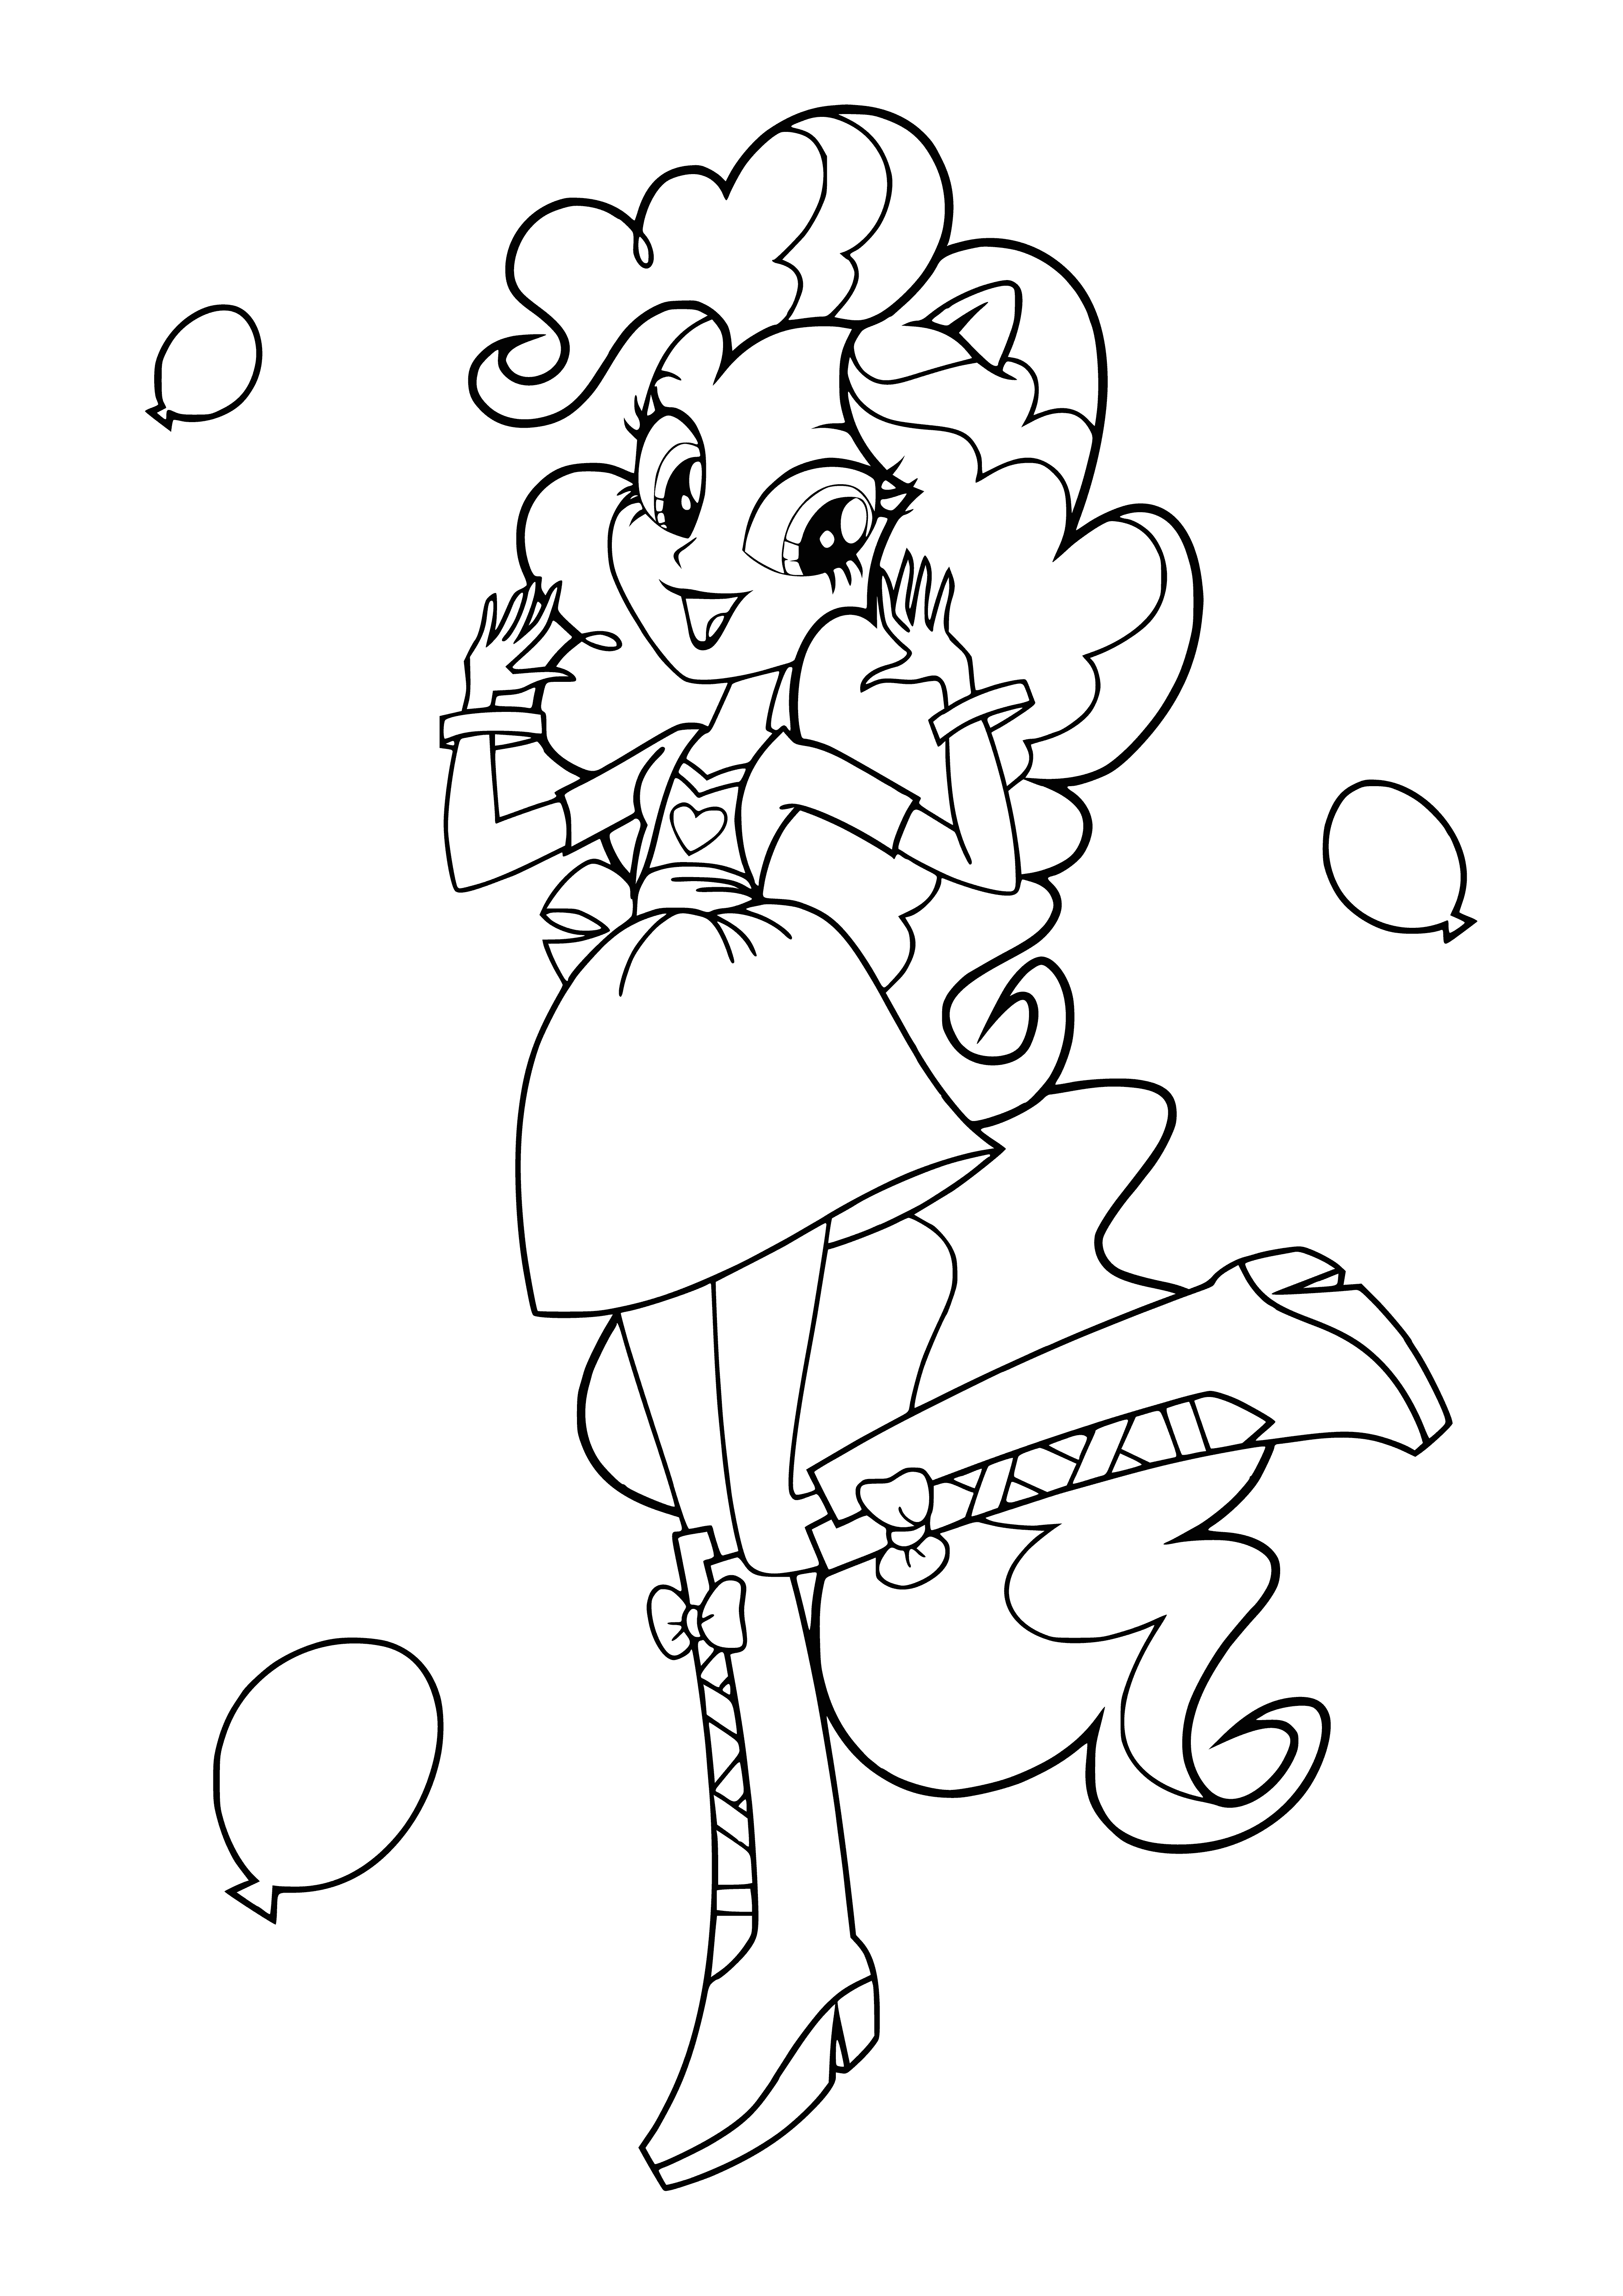 coloring page: Pinkie Pie is an excitable pink humanoid with curly pink hair, blue eyes + a pink dress w/ white apron. She's always ready to party w/ balloon in hand.